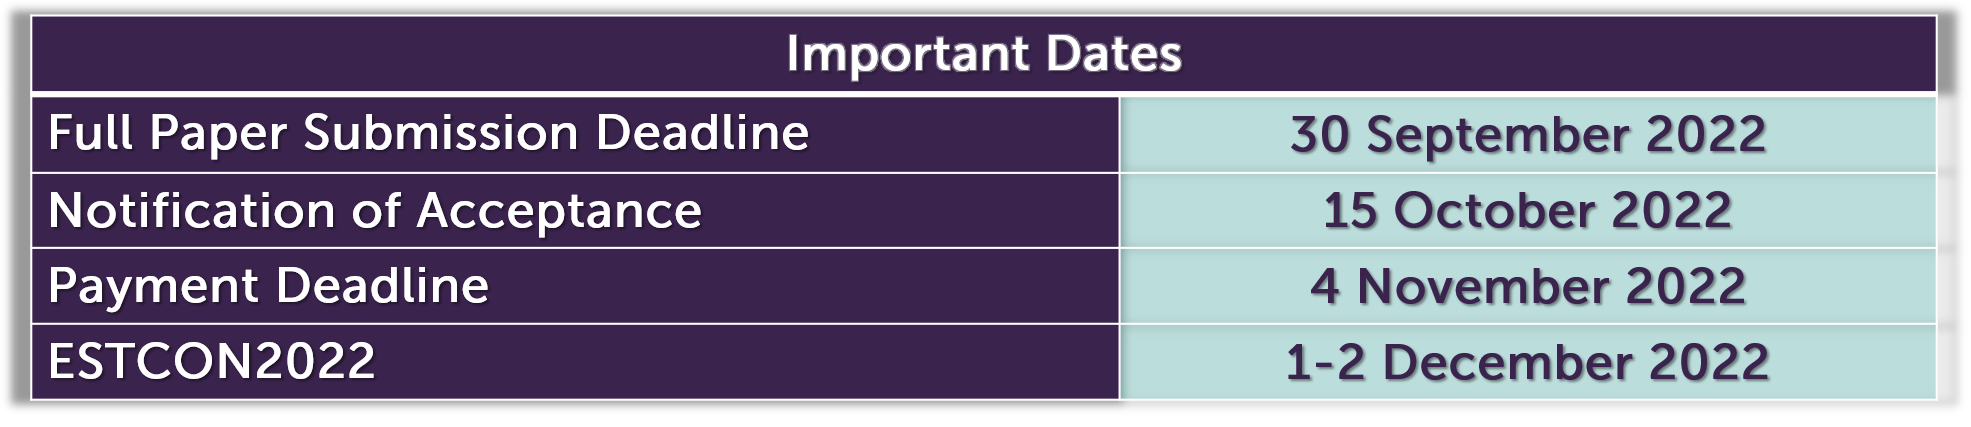 Important dates.png